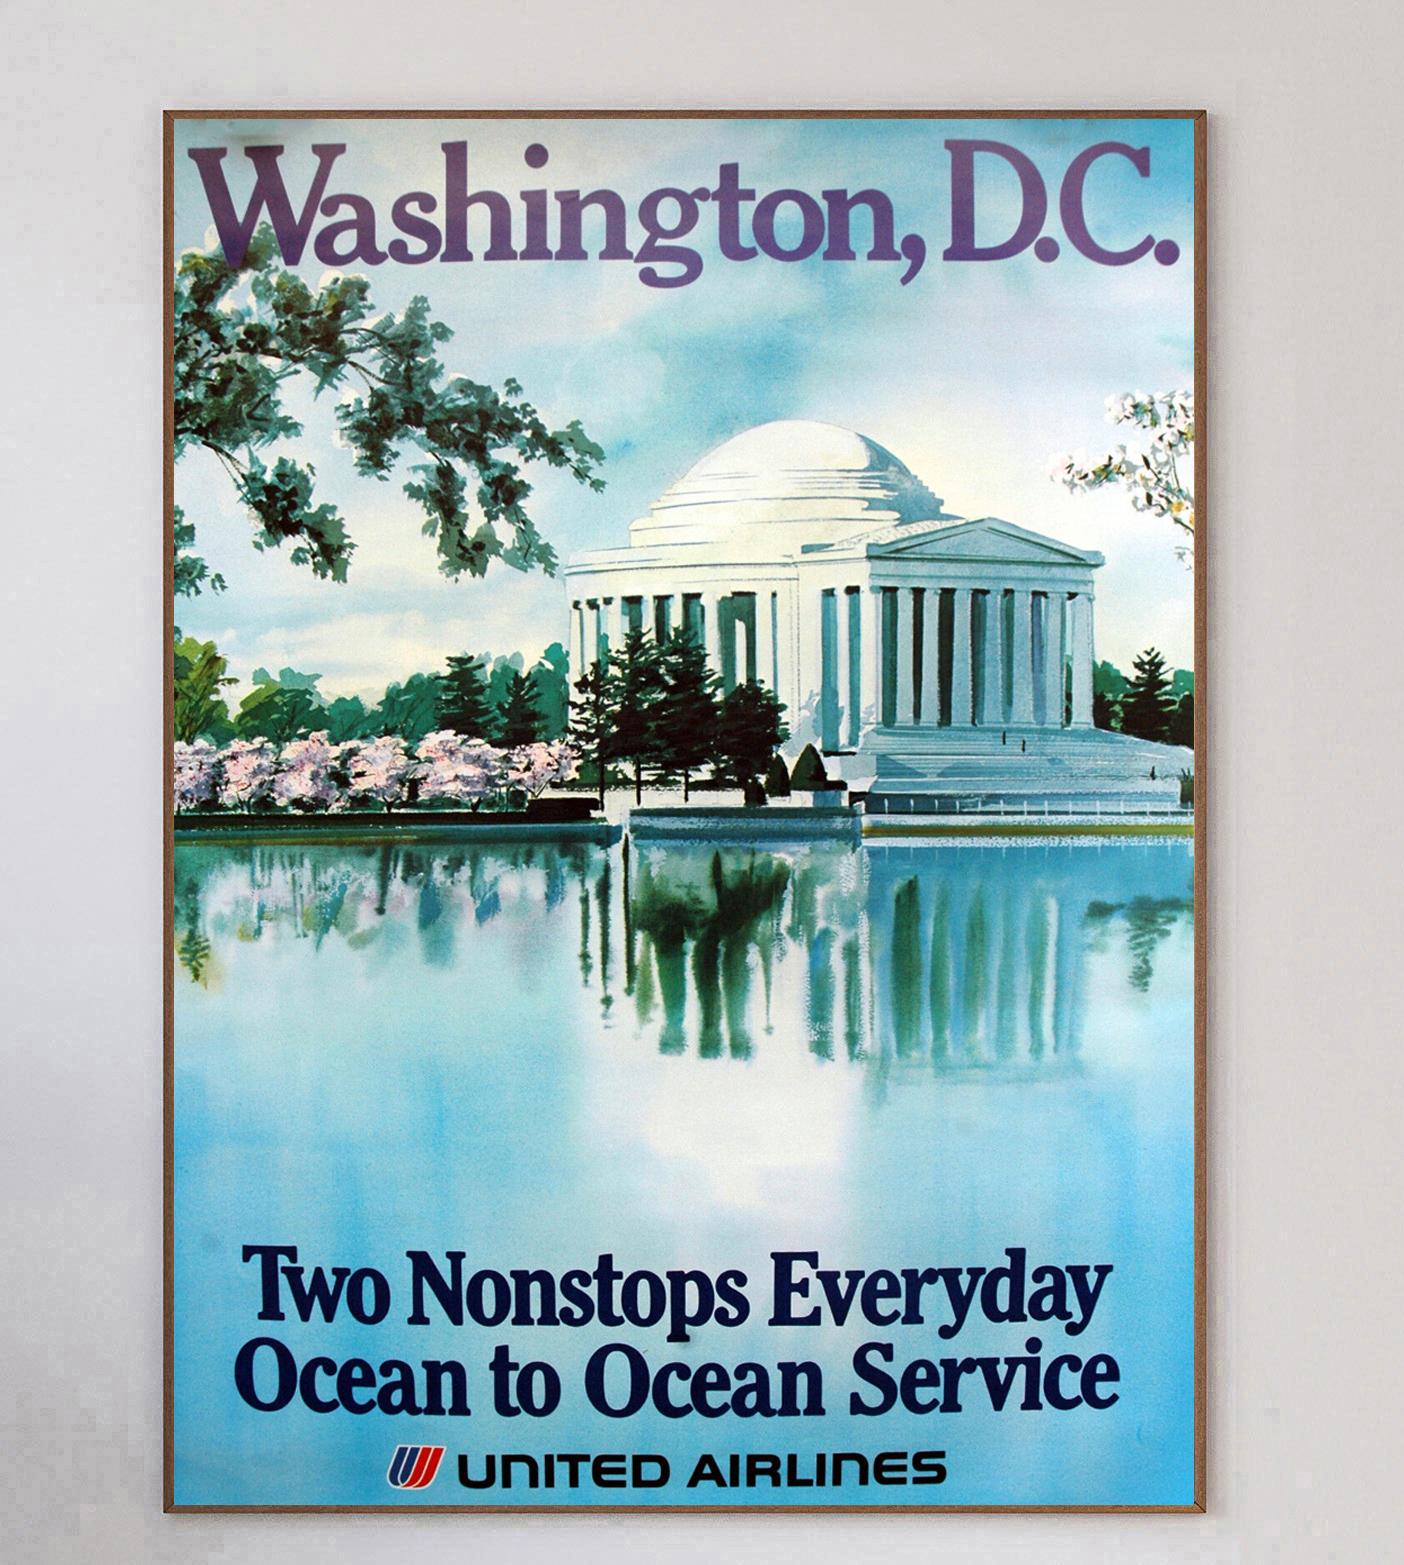 With artwork from artists¬†M.¬†Hagel, this beautiful & rare poster promotes United Airlines routes to Washington D.C. Depicting the Jefferson Memorial on a sunny day, this great design is typical of its 1970 release year.¬†

The third largest